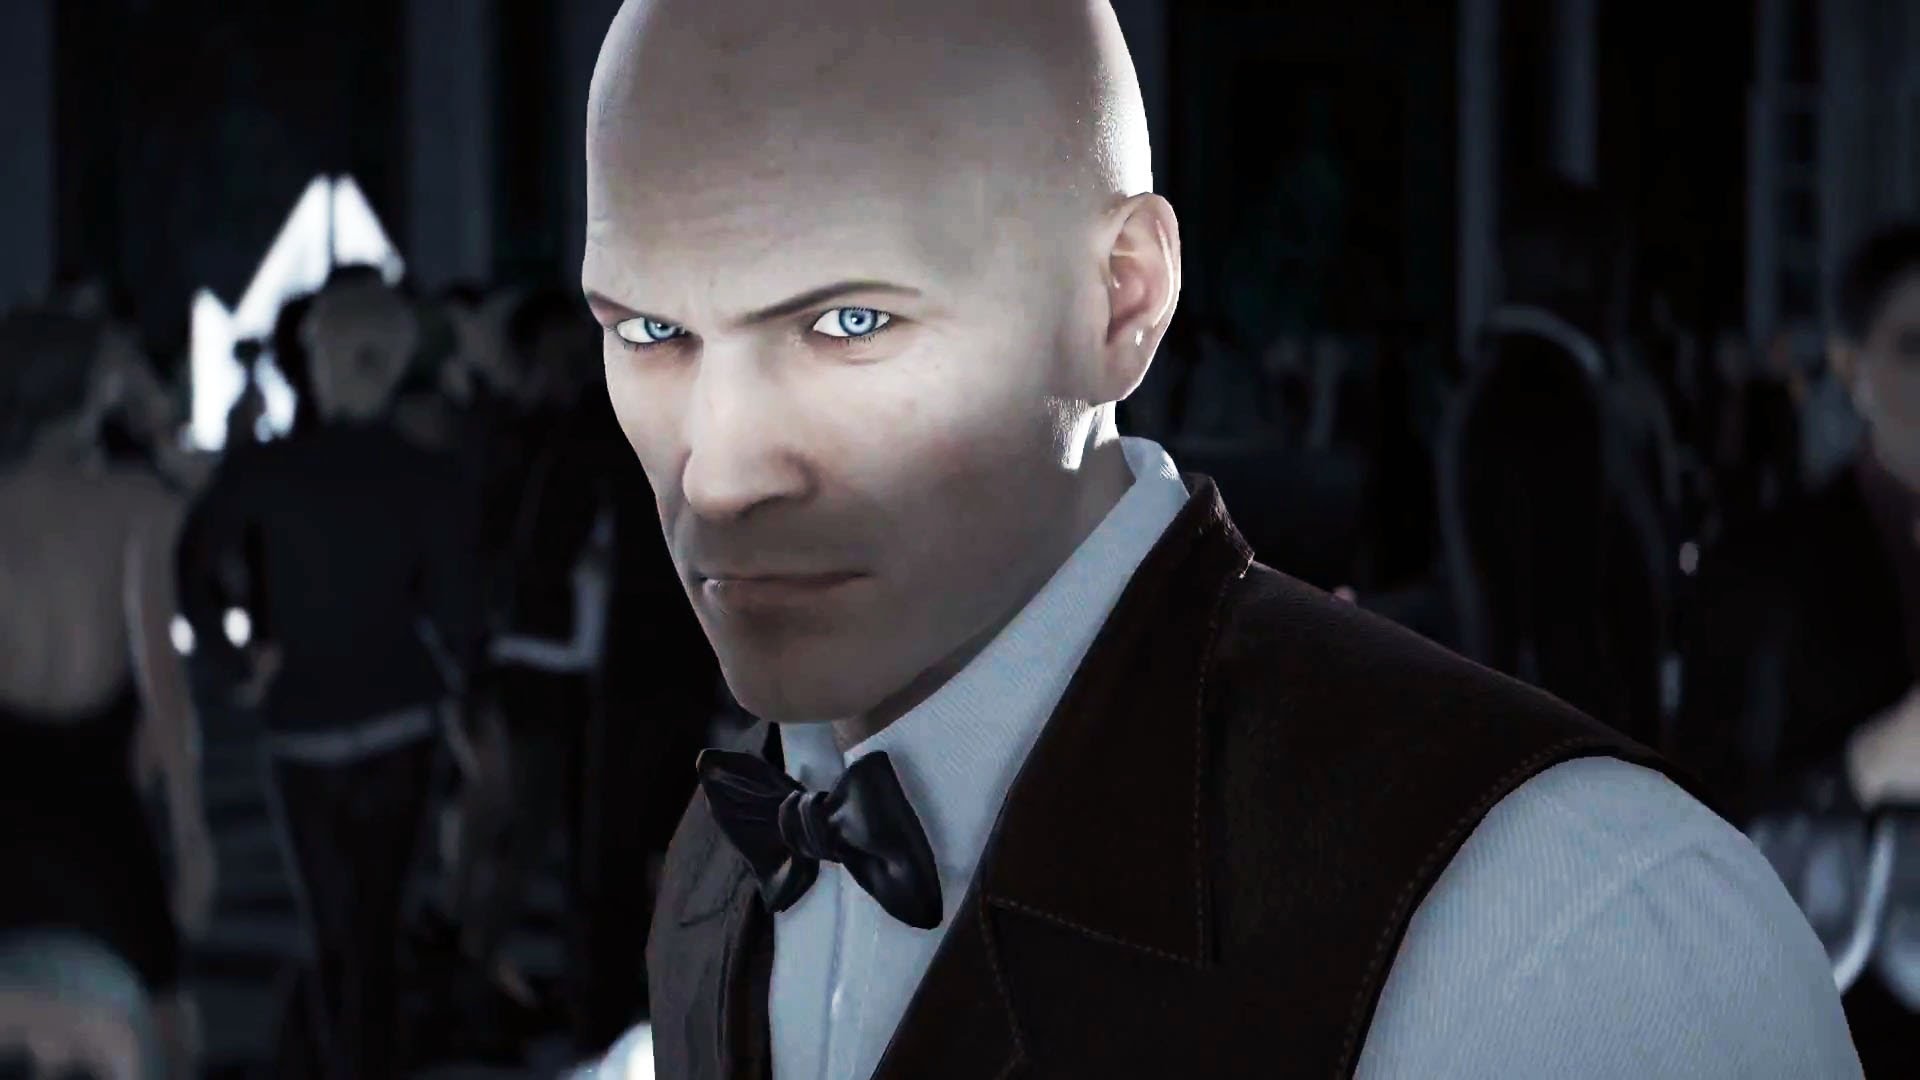 “Hitman” Ep. 2 Release Date Announced - Heading to Italy in April